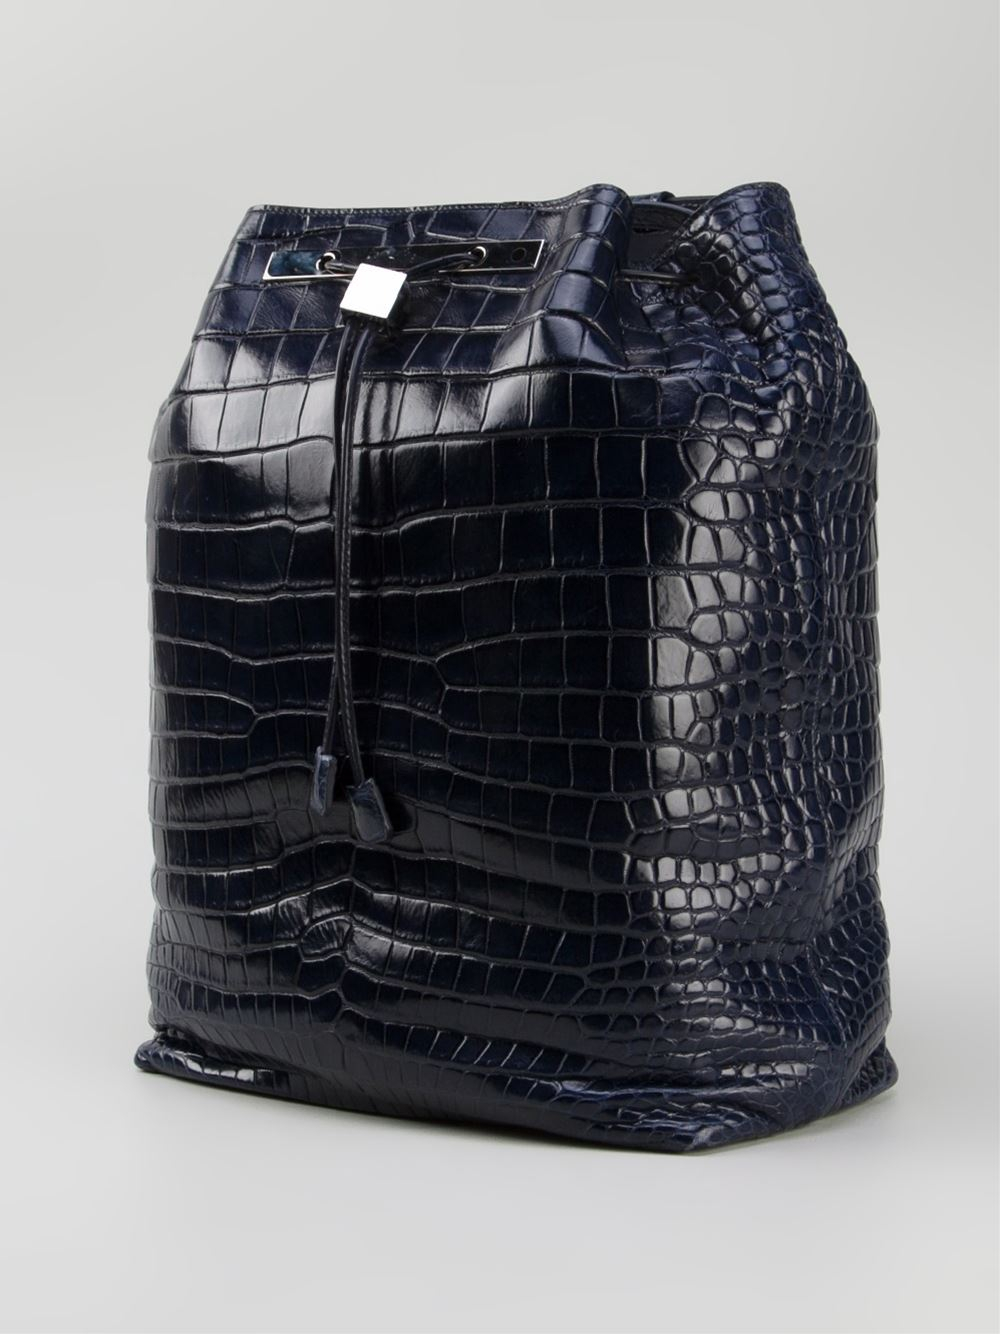 The Row Alligator Backpack - $34000